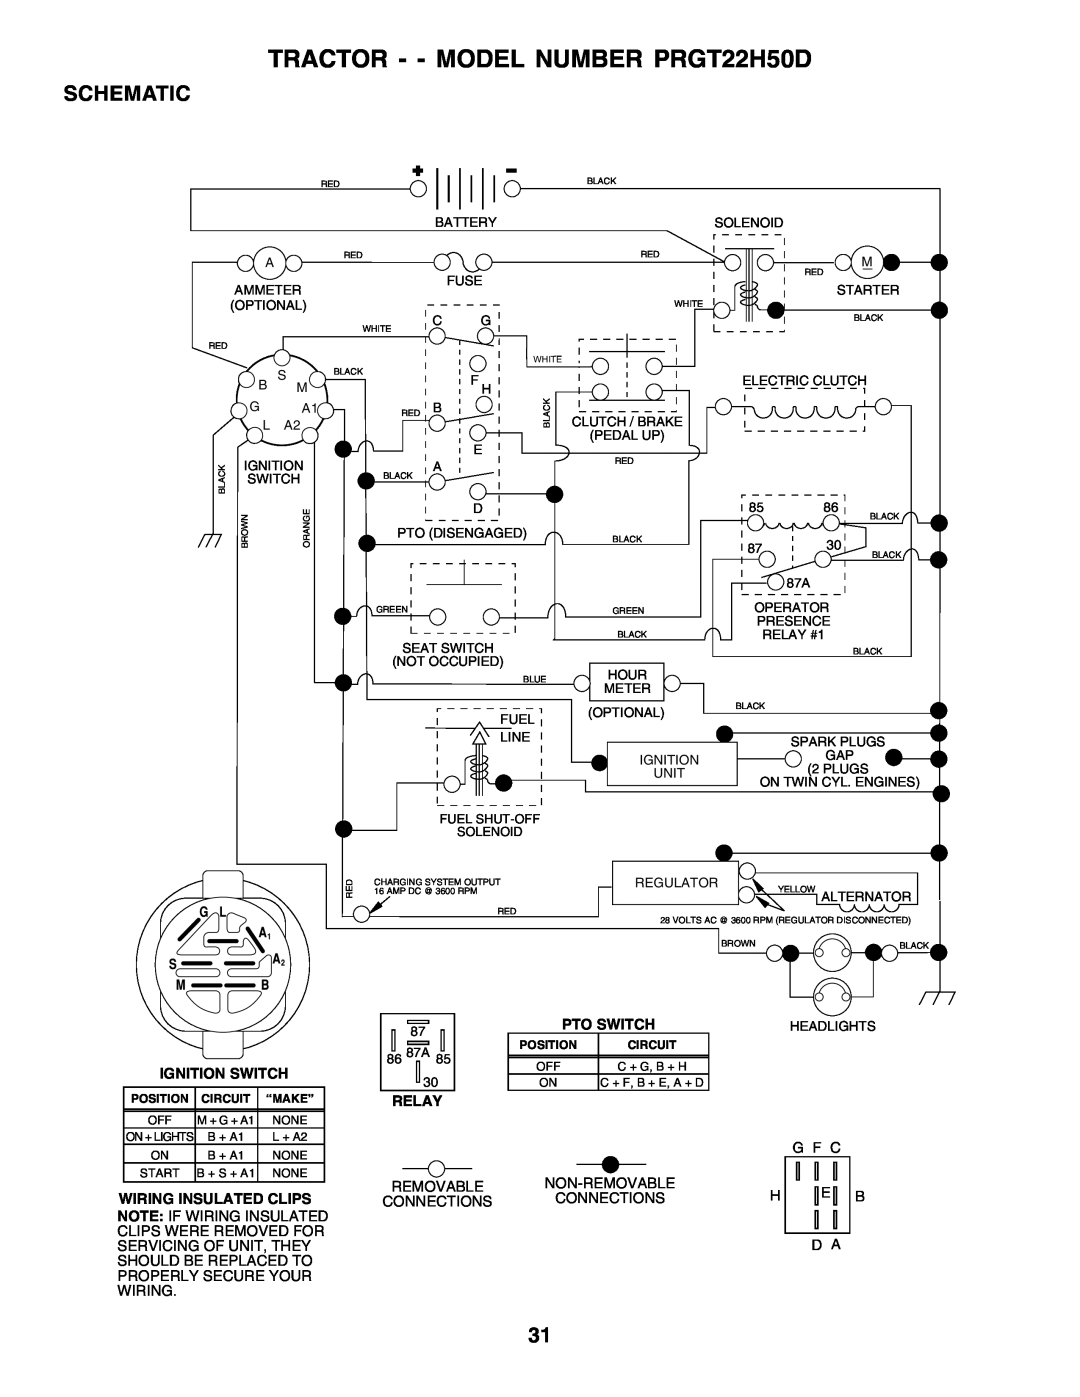 Poulan owner manual TRACTOR - - MODEL NUMBER PRGT22H50D, Schematic 